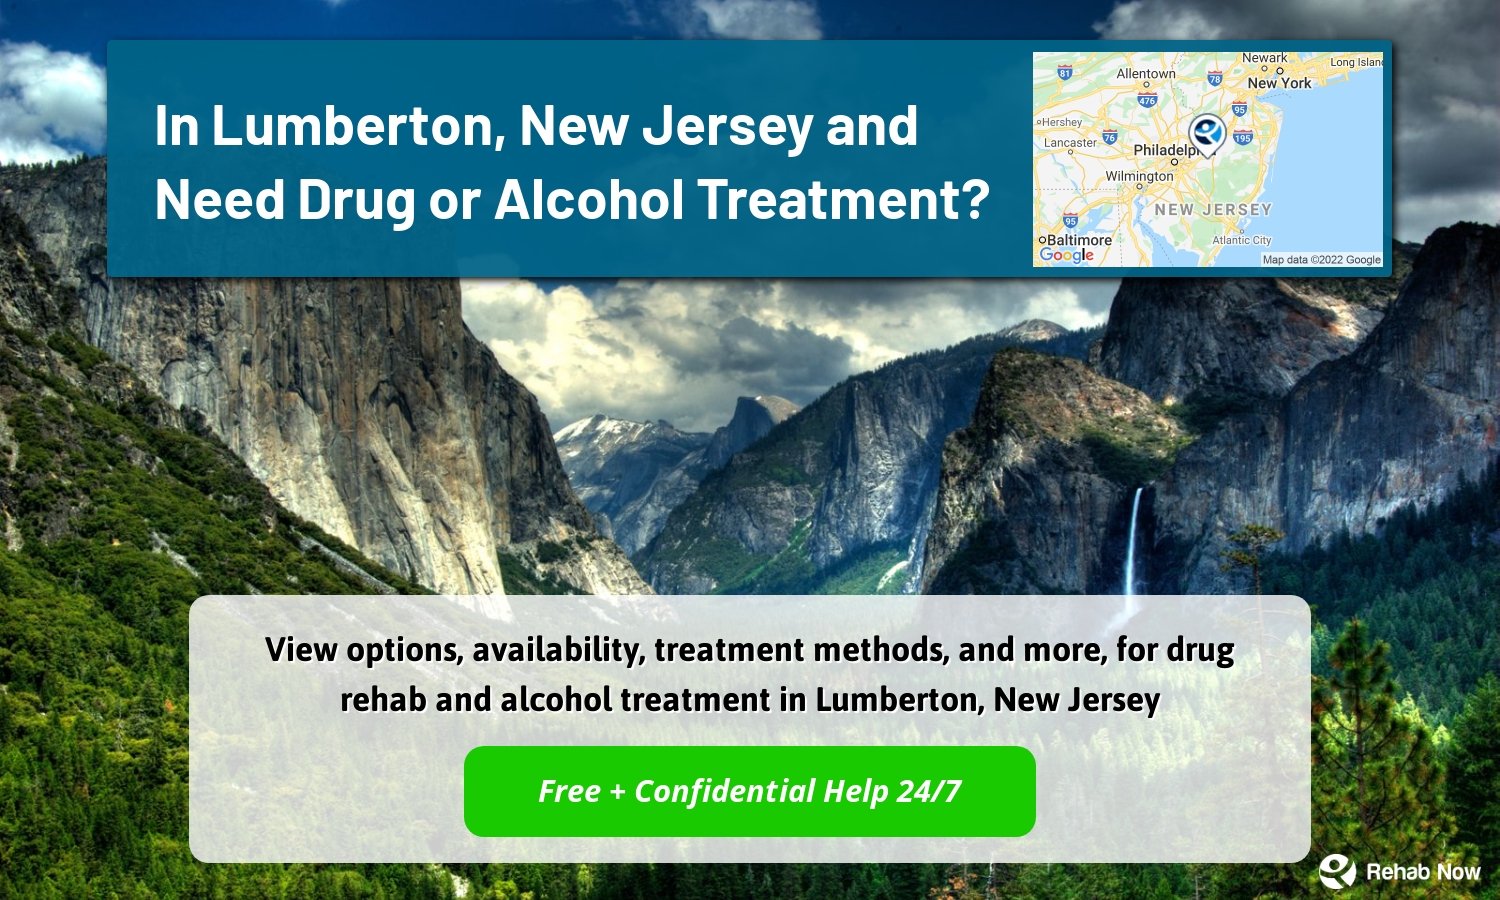 View options, availability, treatment methods, and more, for drug rehab and alcohol treatment in Lumberton, New Jersey